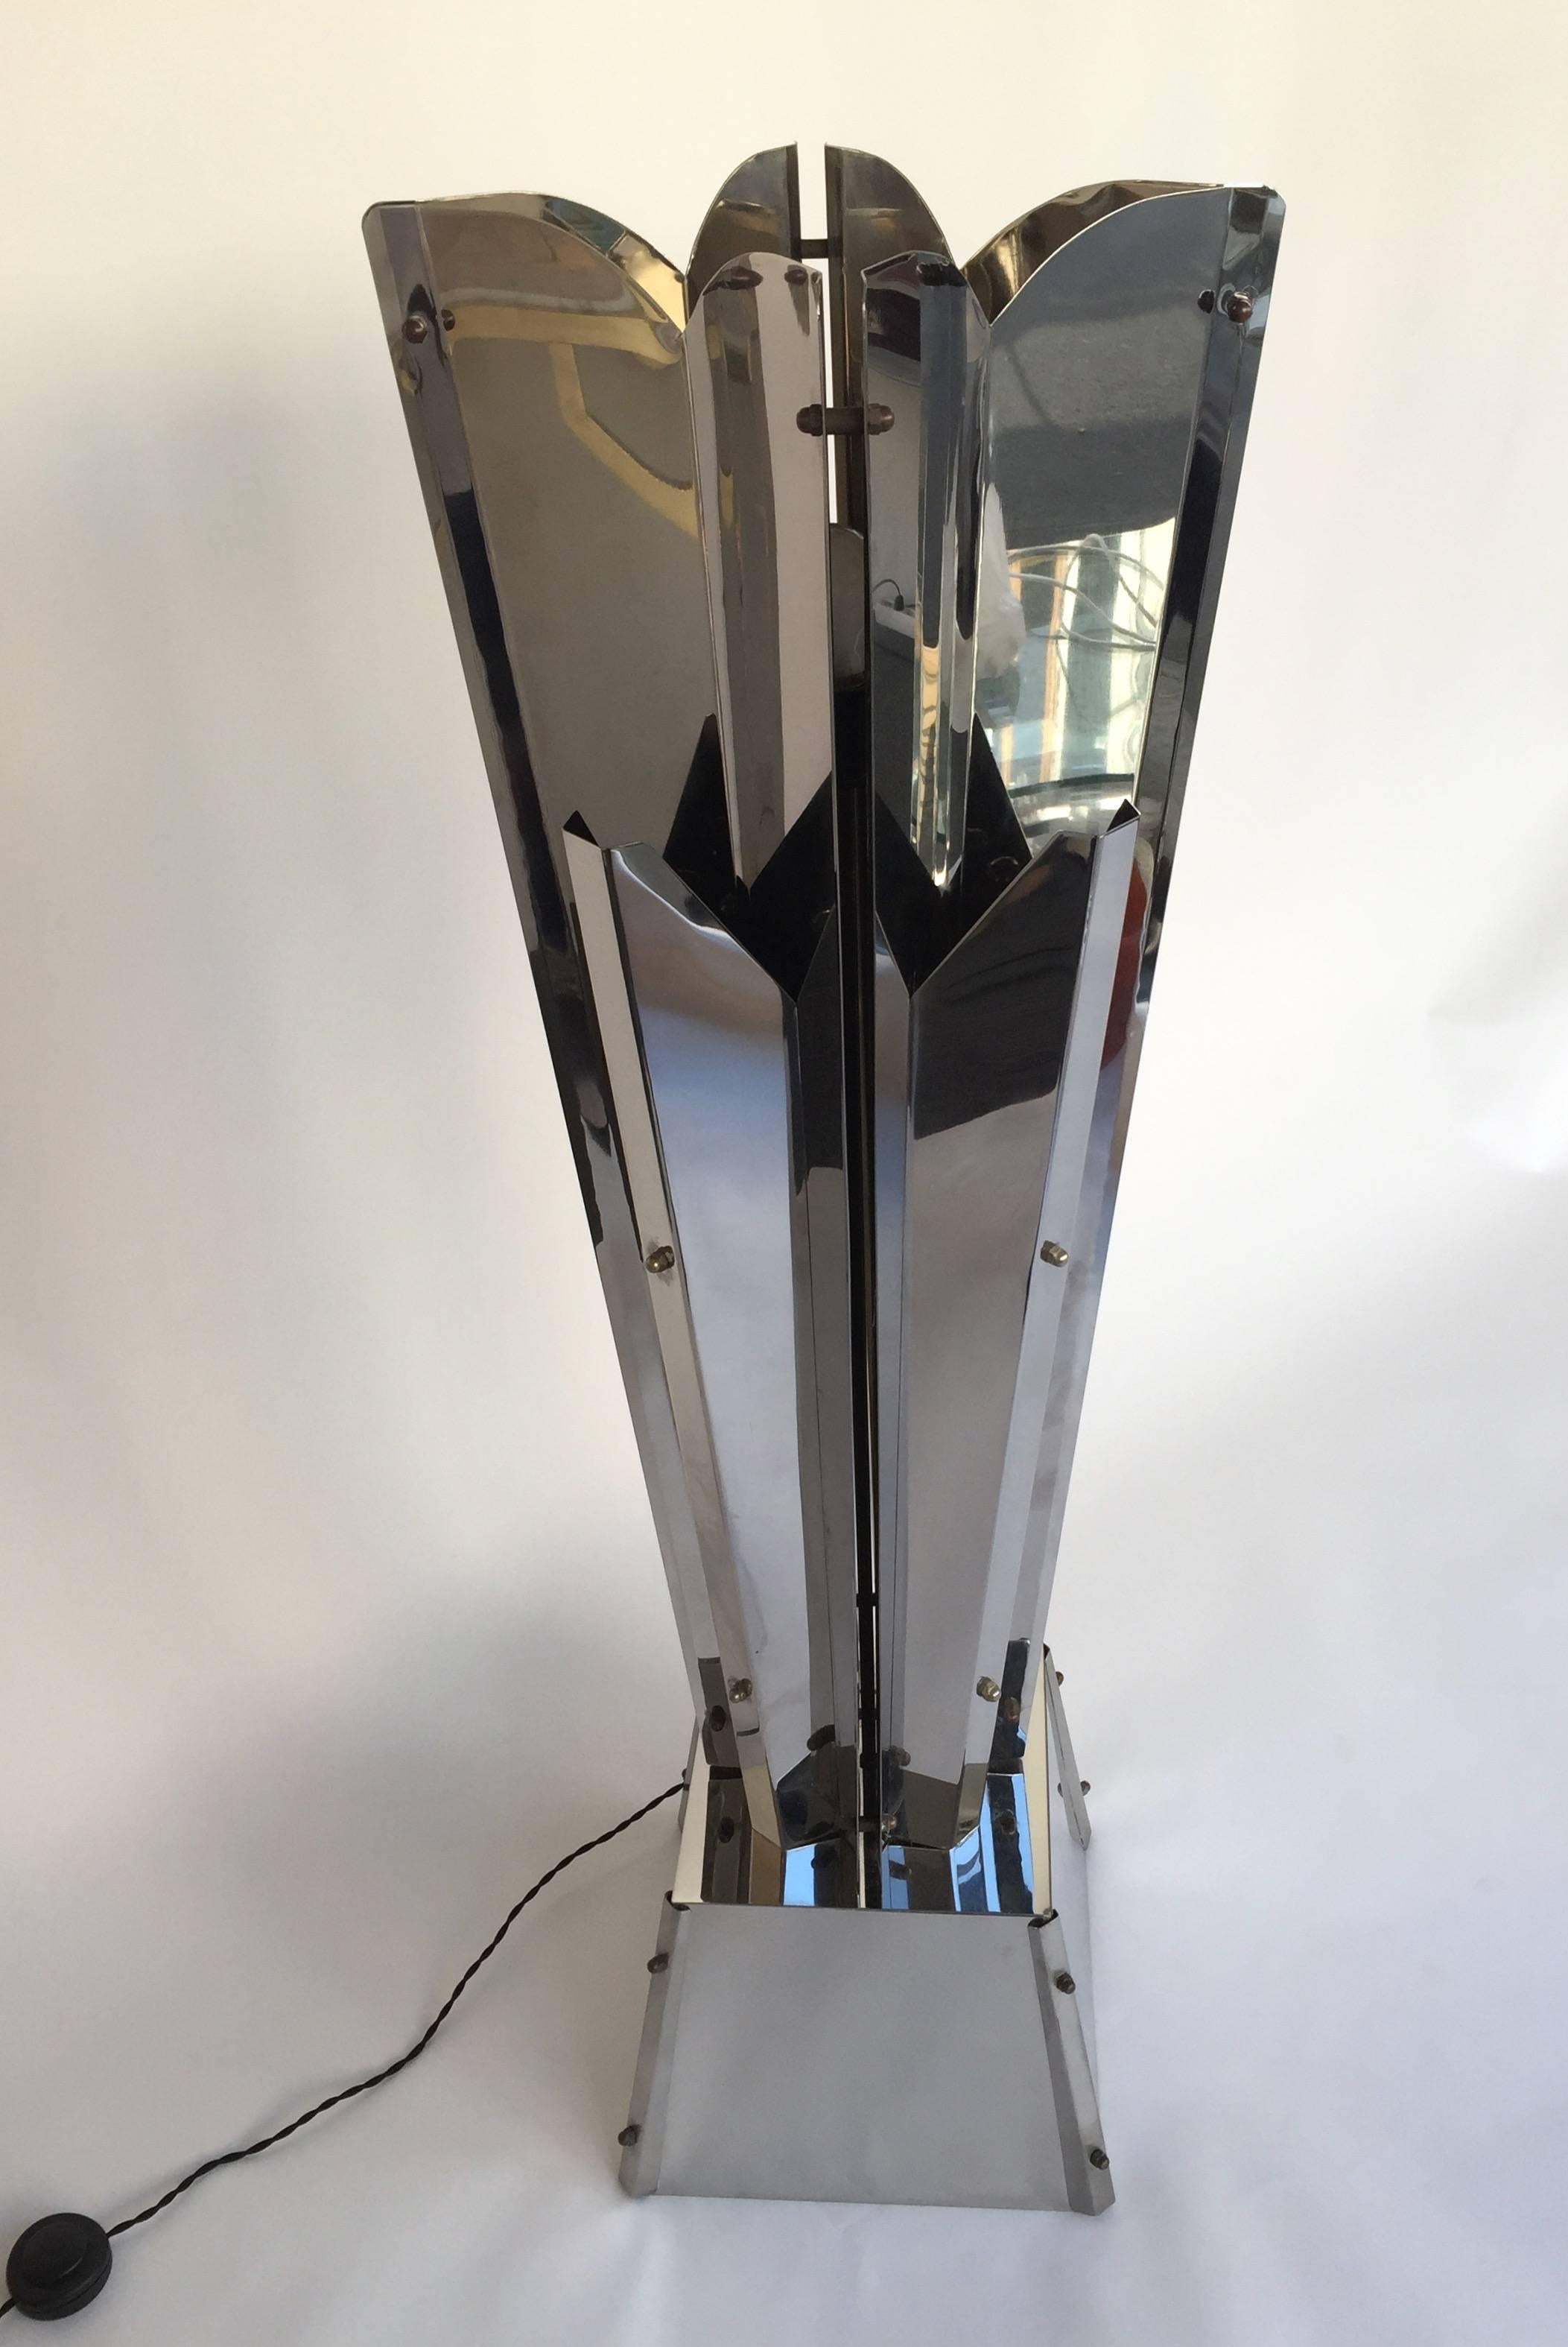 Rare sculptural floor lamp by Reggiani in metal chrome, one central light and four side bulbs. Screwed system typical of Reggiani work. Very impressive and decorative. It s a famous design like Gaetano Sciolari , Maria Pergay , Serge Lebovici in the